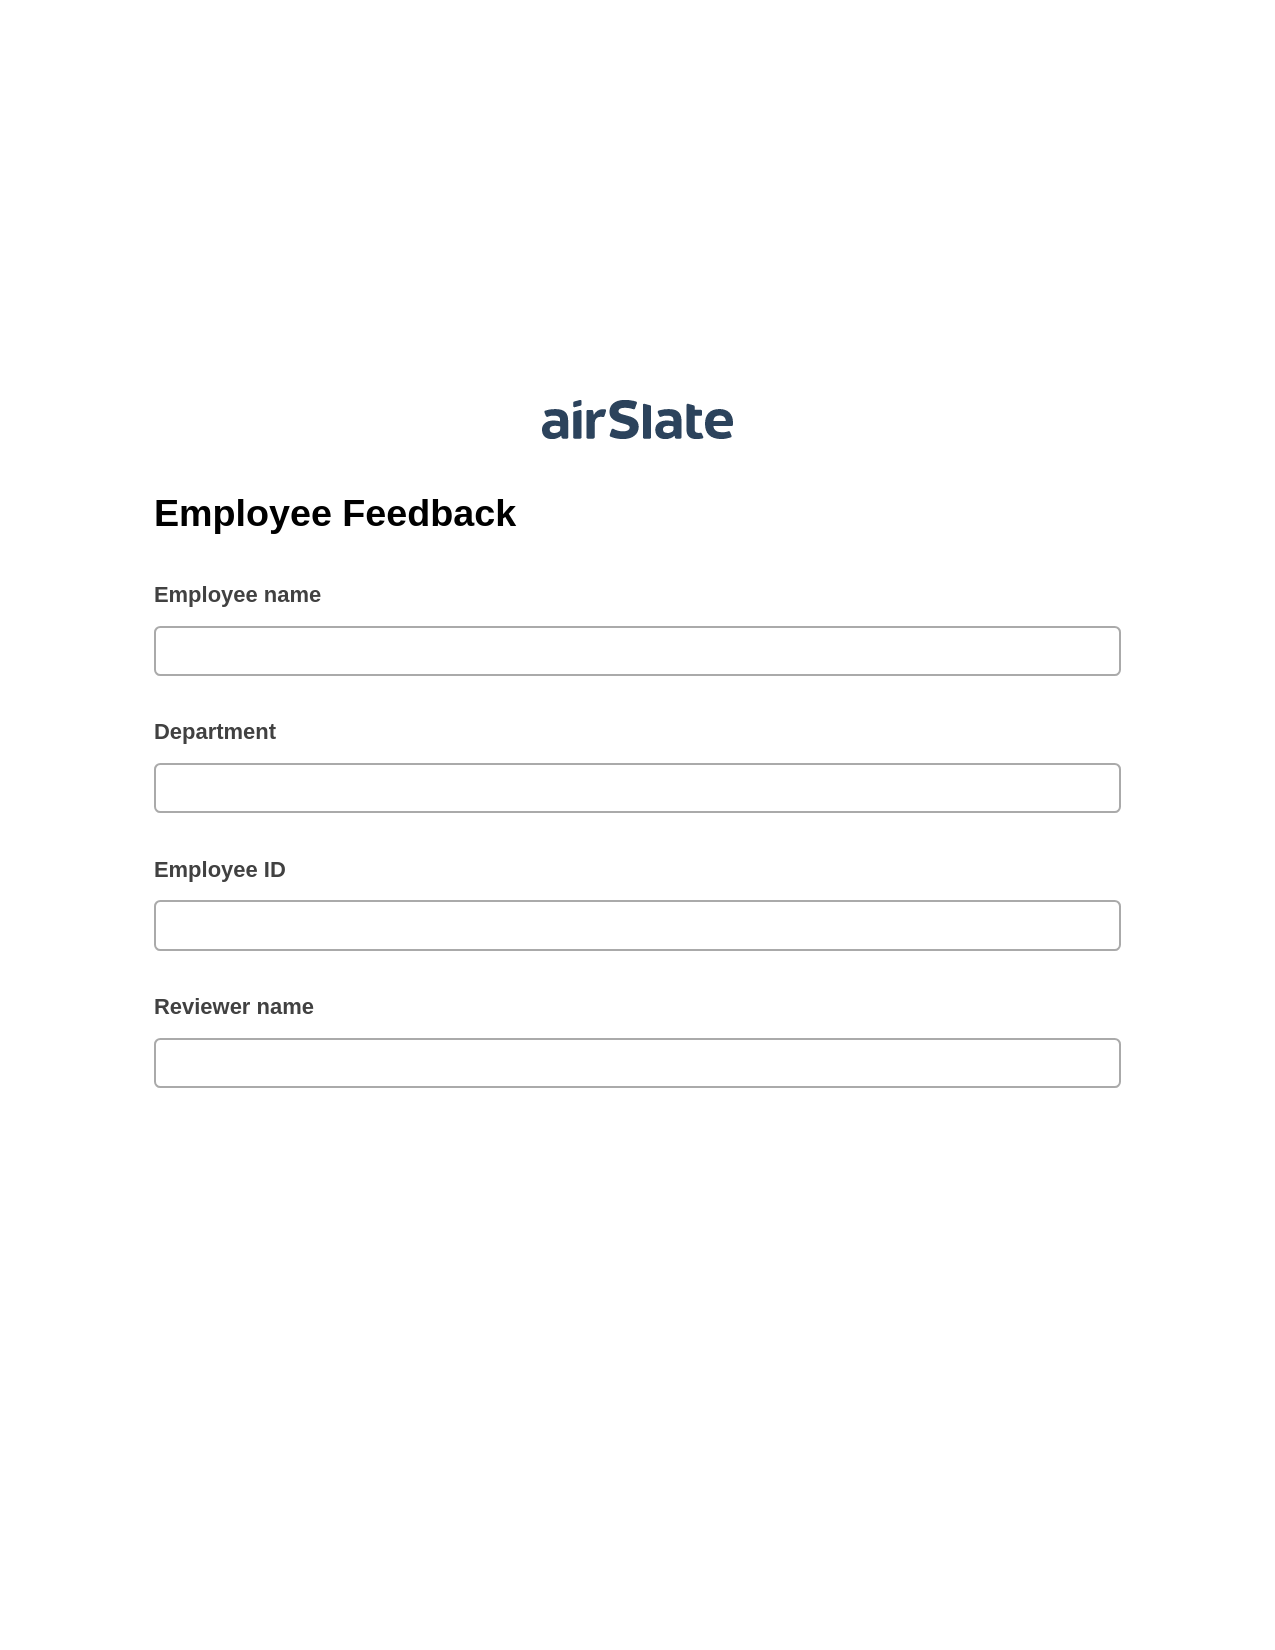 Multirole Employee Feedback Pre-fill from CSV File Dropdown Options Bot, Remove Tags From Slate Bot, Post-finish Document Bot